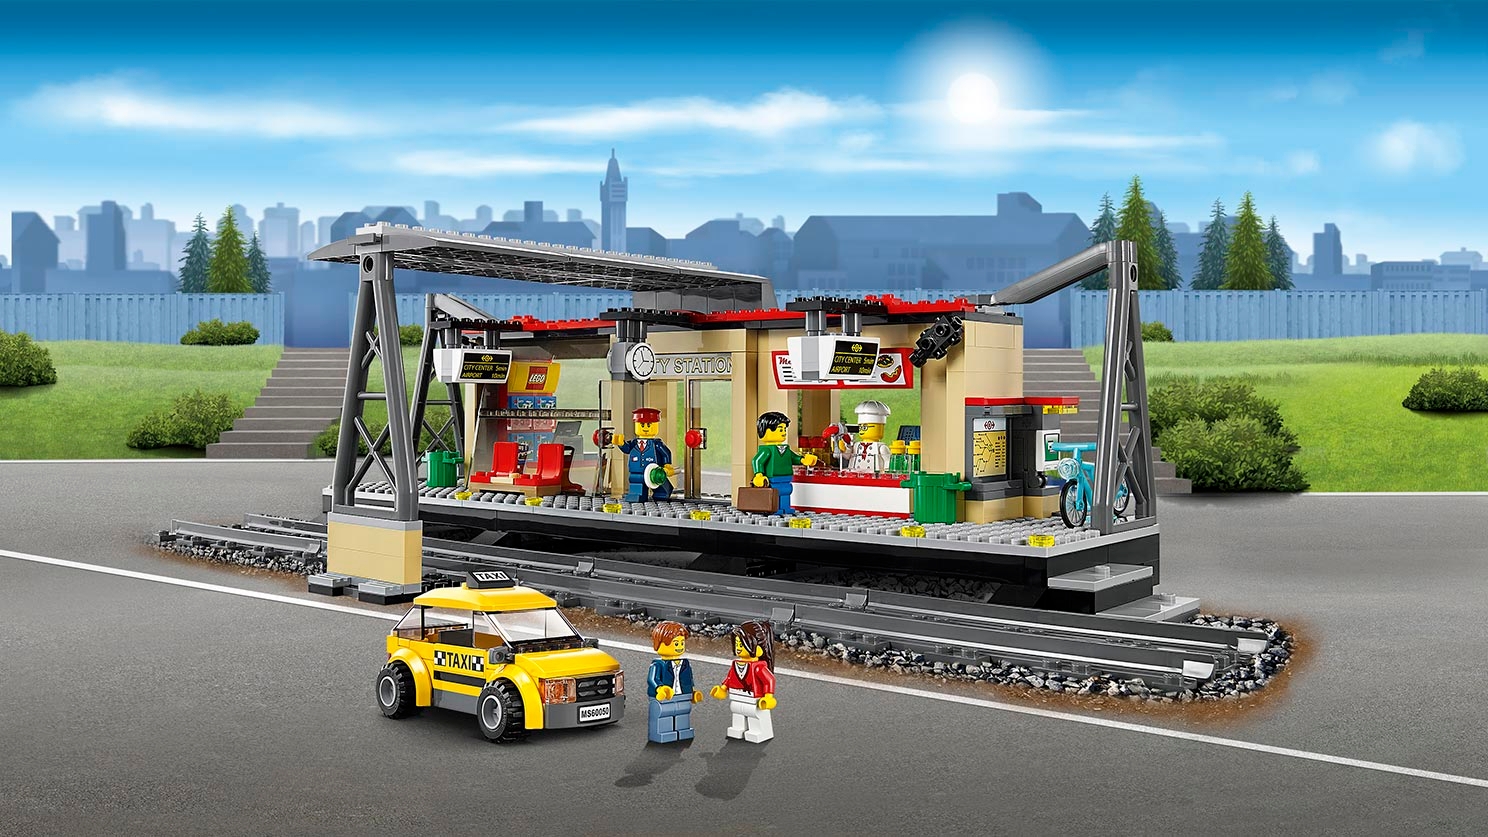 LEGO City Train station with passengers and crew minifigures - Train Station 60050